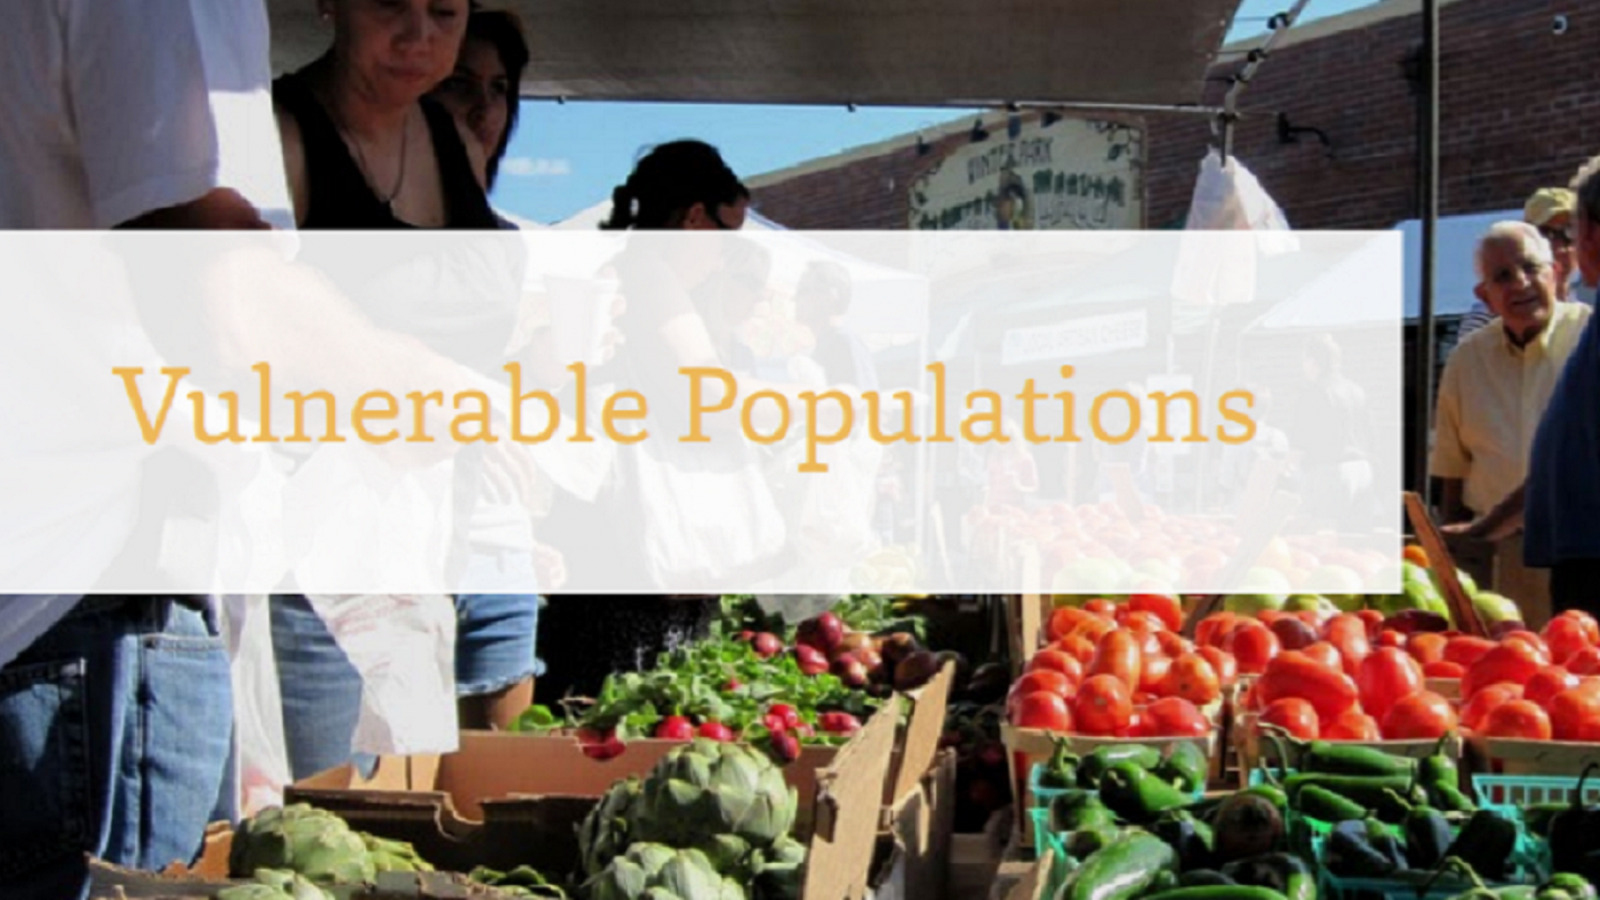 Farmer's market table with vegetables organized in boxes. People are shopping and there is text that reads 'Vulnerable Populations'